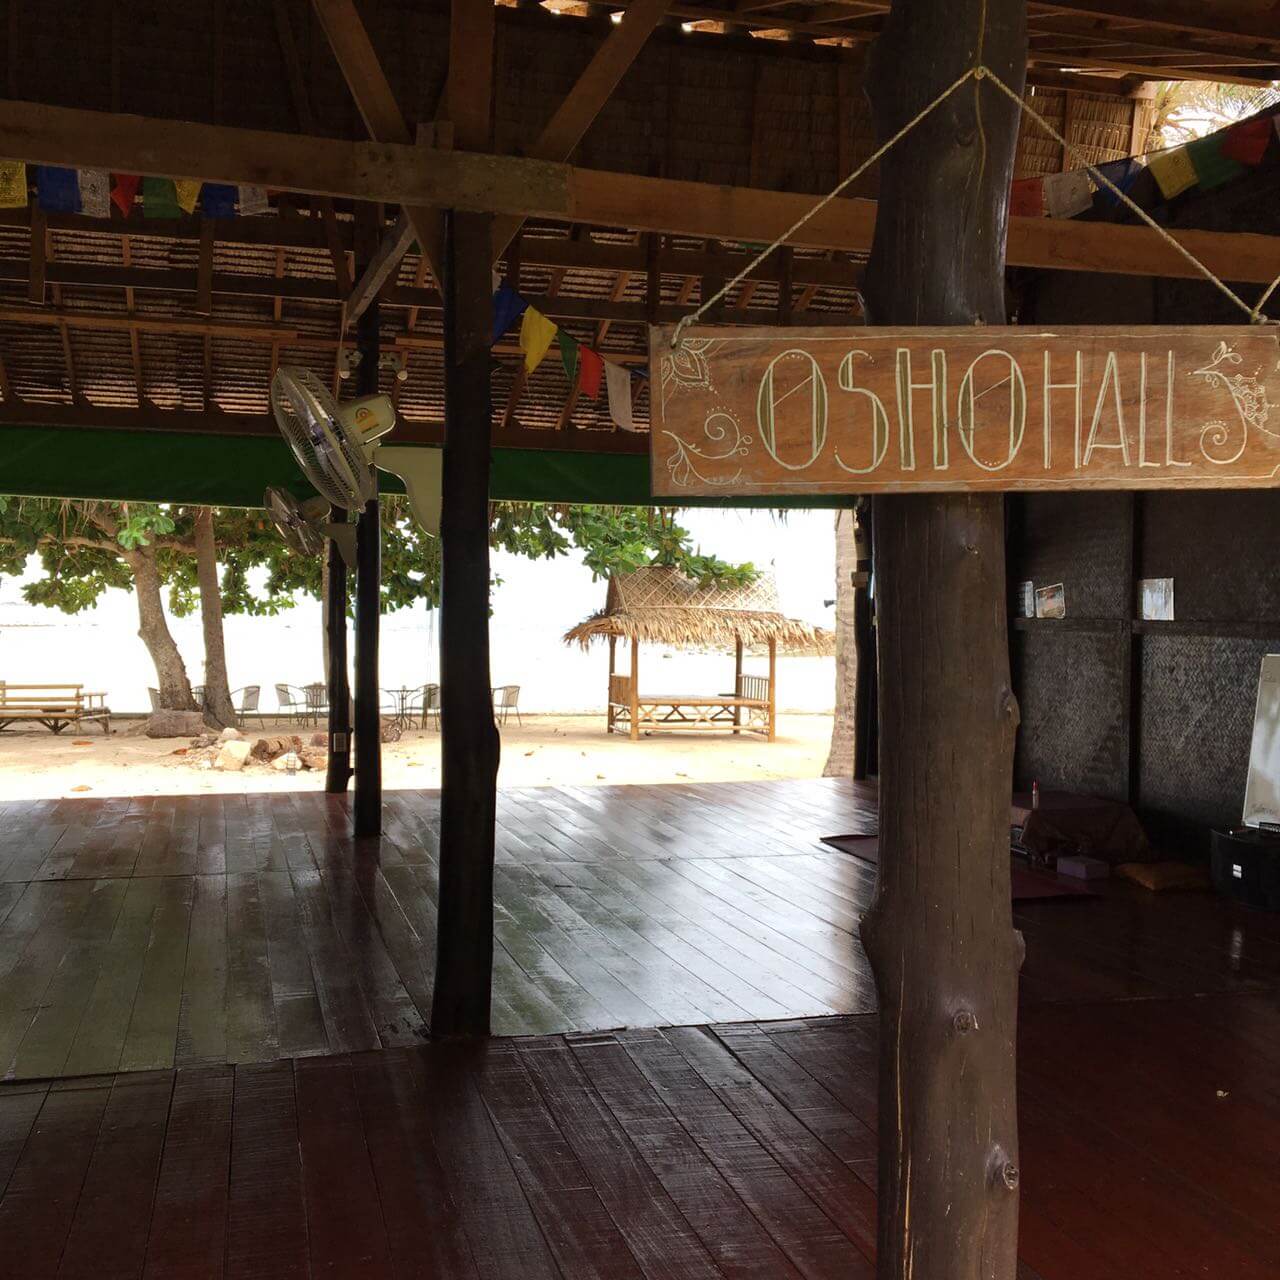 The inside of a wooden building with a sign that reads OSHO HALL